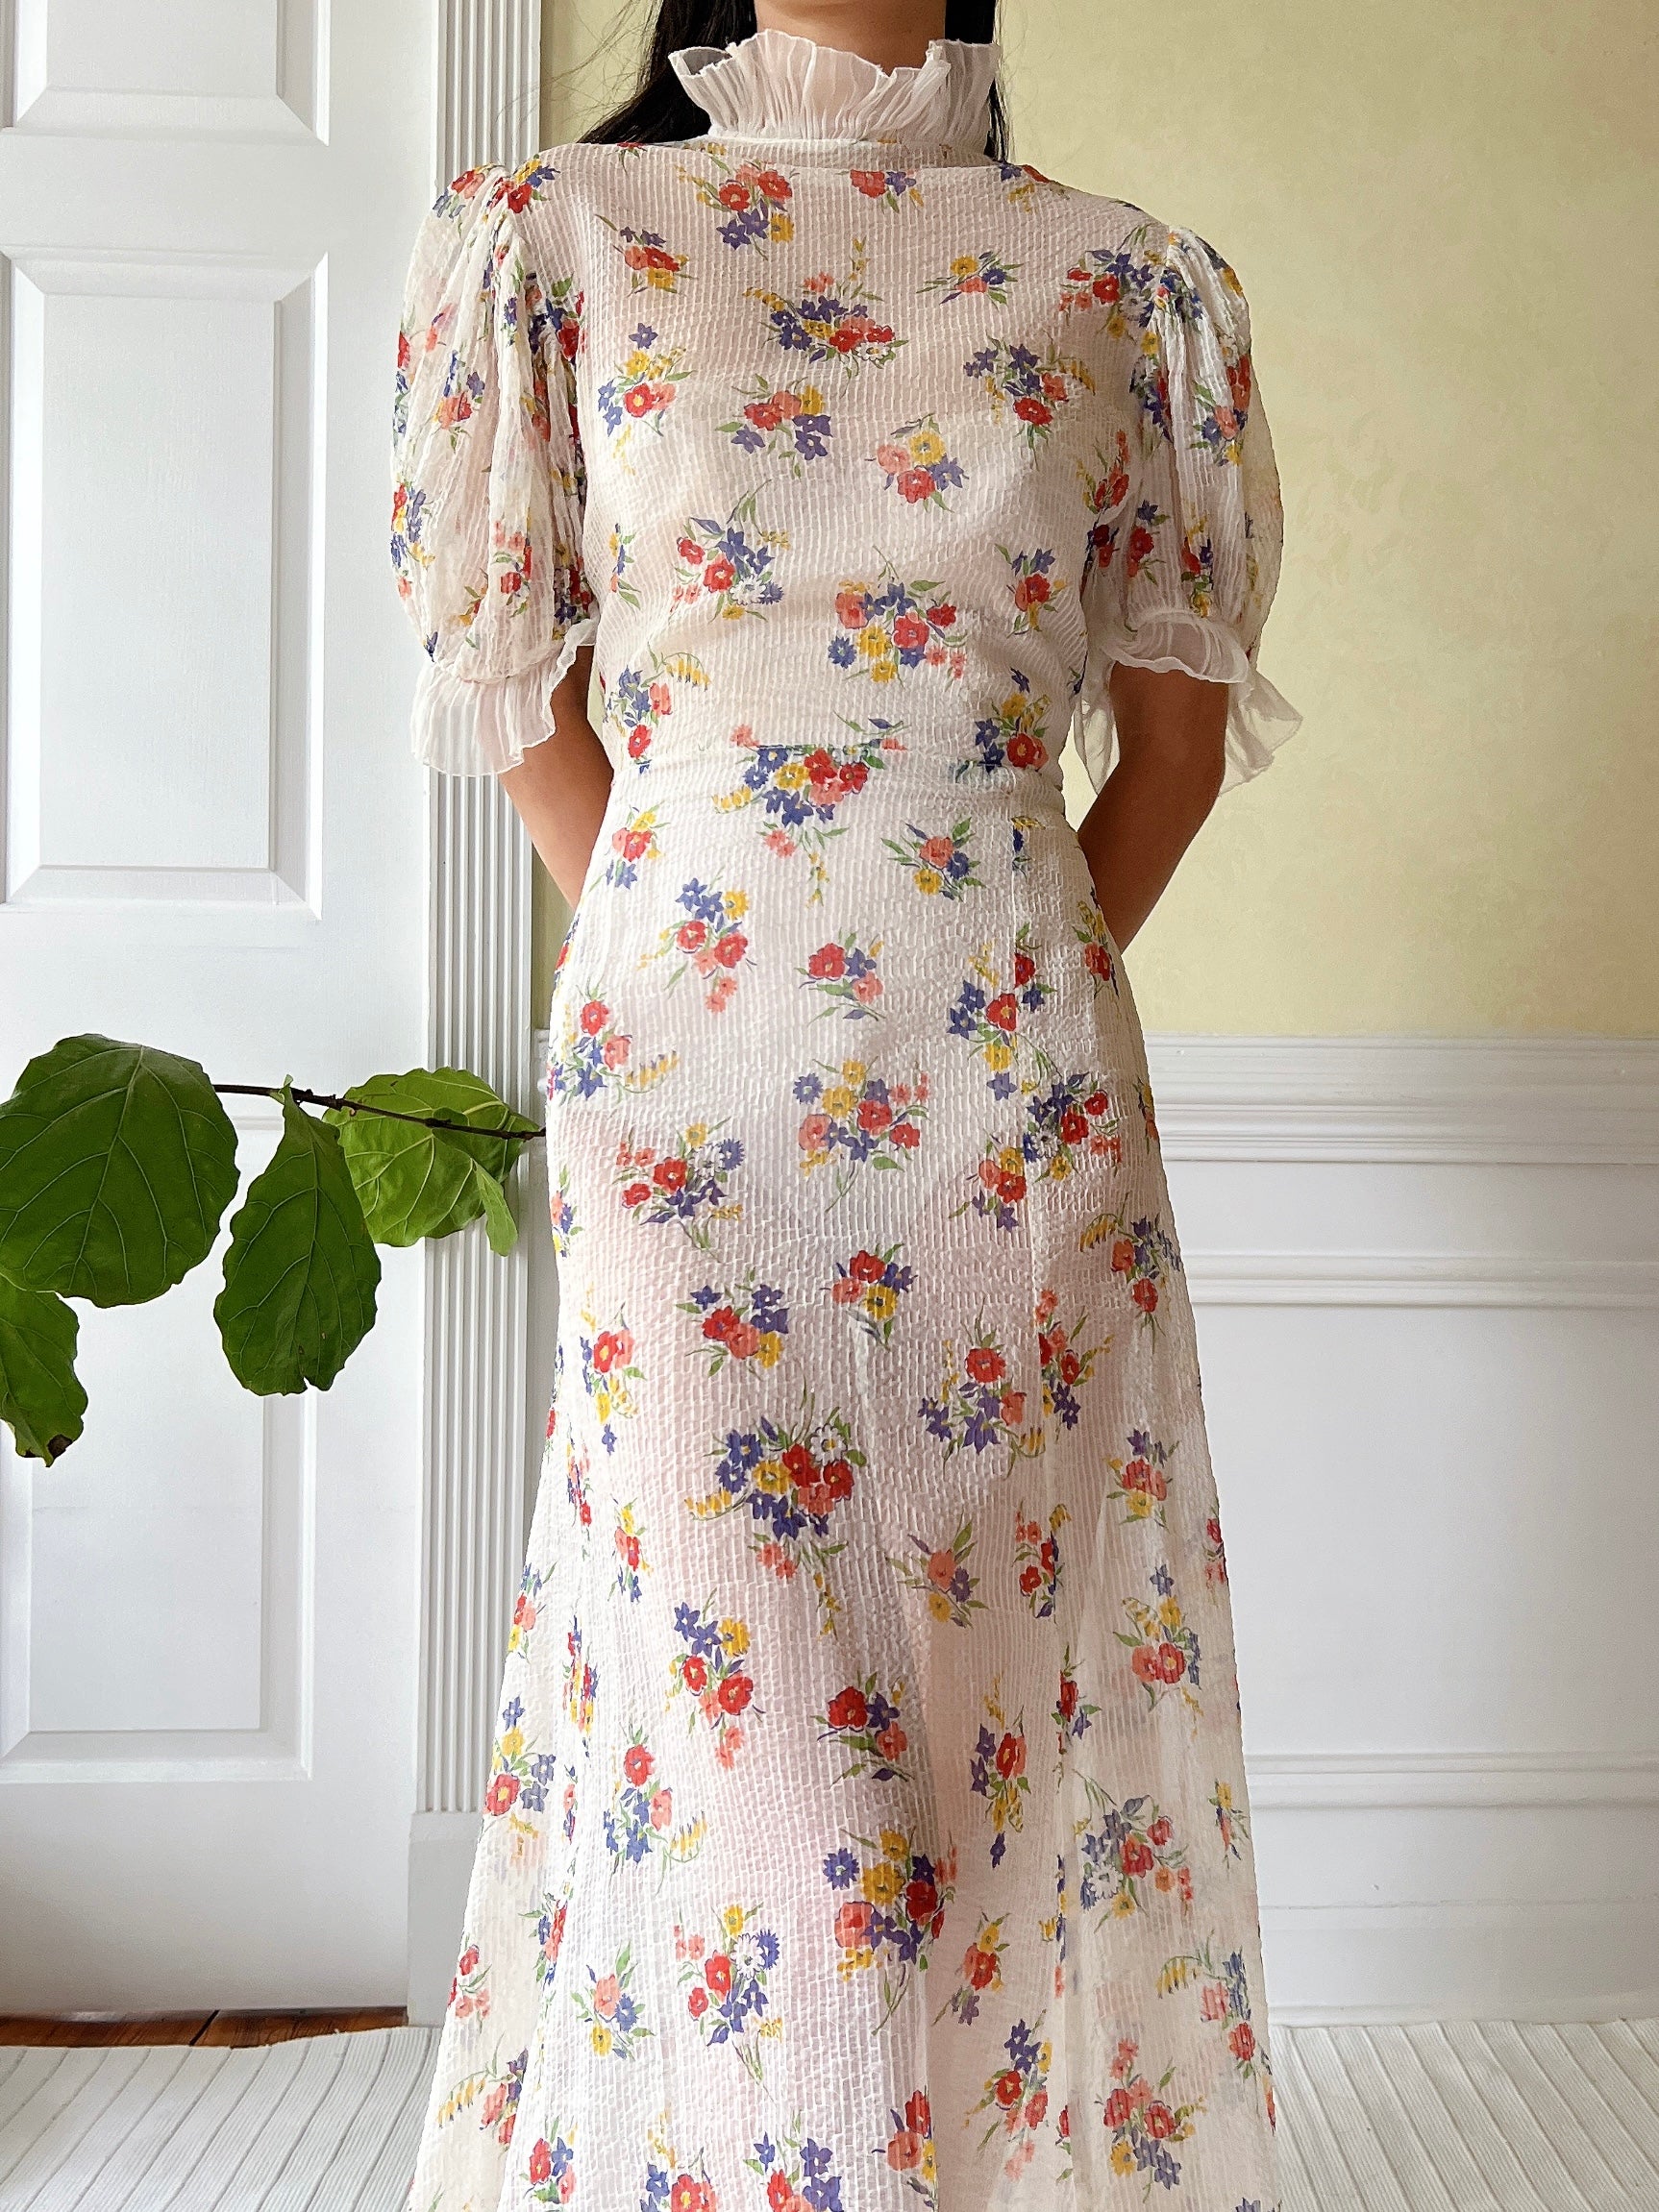 1930s Textured Floral Organdy Dress - S/M